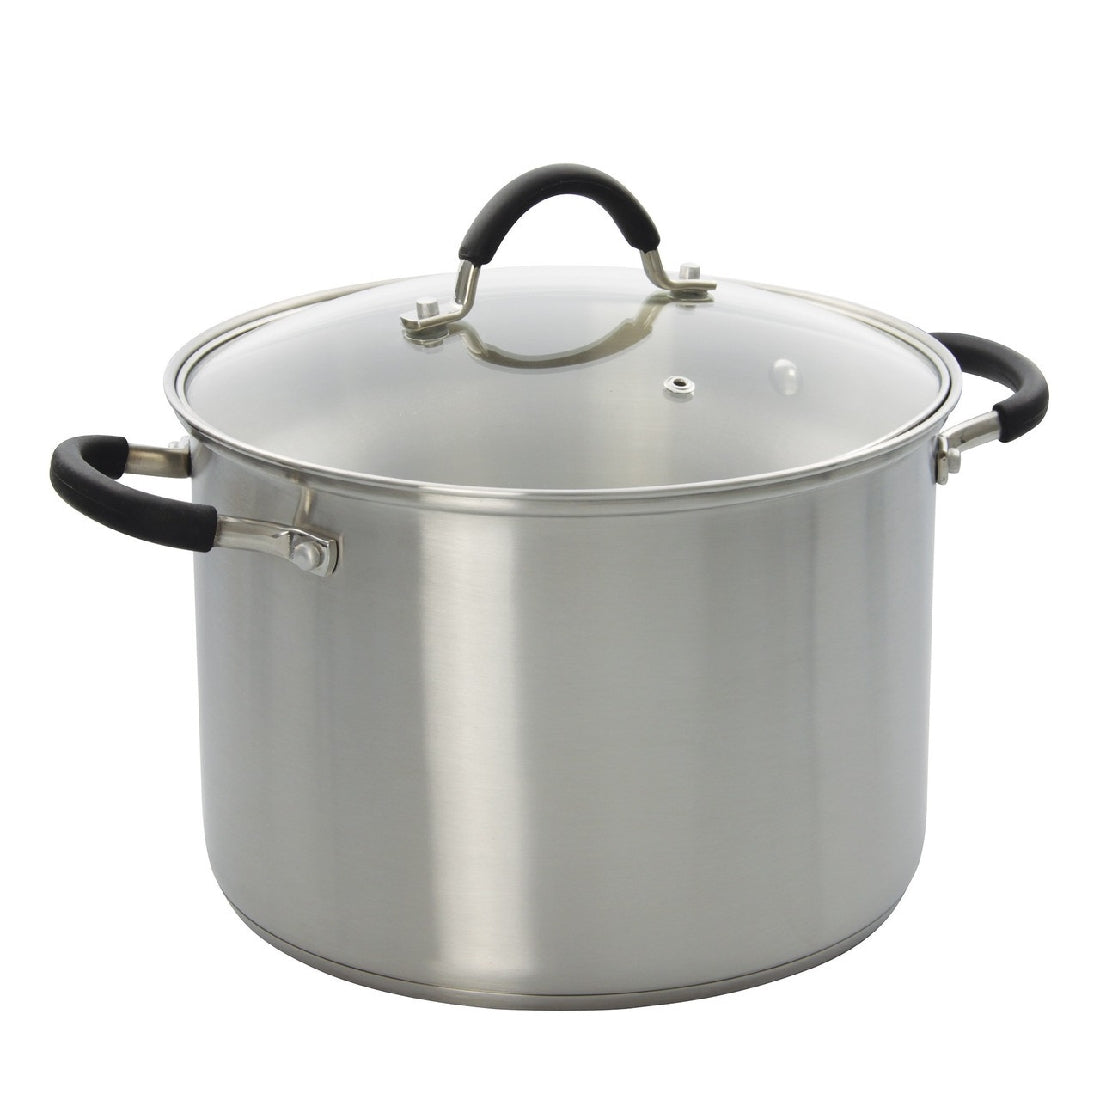 Pyrolux Stainless Steel 26cm/10l Stockpot